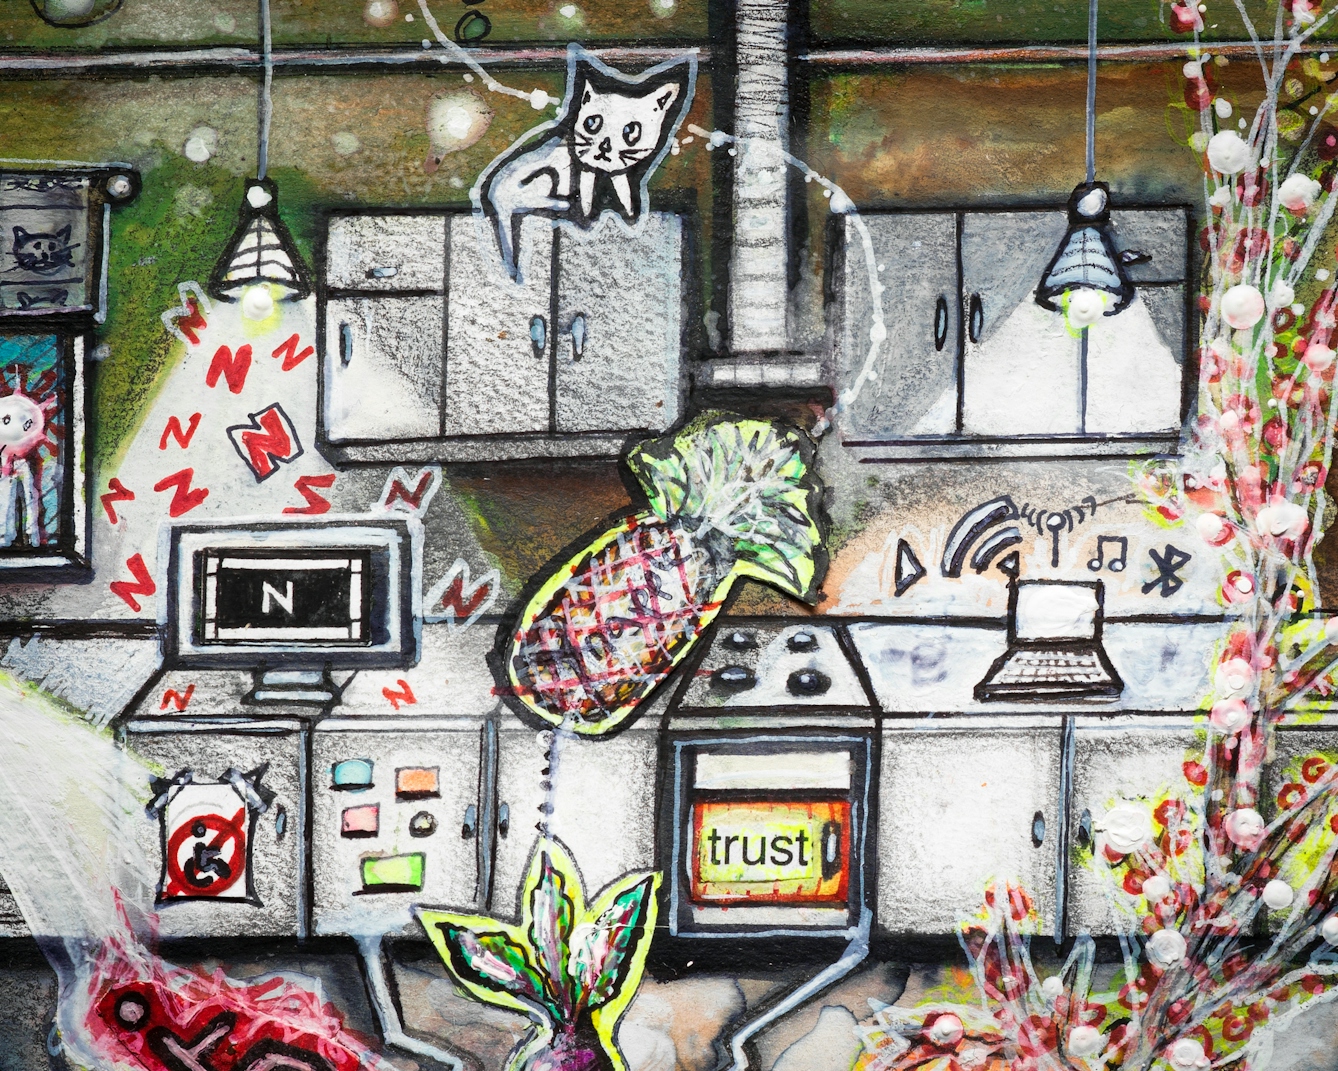 Artwork using watercolour and ink incorporating collaged words throughout the scene. The artwork shows a busy multi-coloured room with kitchen units in the background.  On a fridge with a no access sign and a wheelchair within it, stands a screen with the letter ‘N’. Red ‘N’ letters float in the air around it. The oven has the word ‘trust’ on it, and on the worktop is a laptop with icons above it indicating it is playing music. In the foreground, a pineapple and a cat appear to float in the air. 